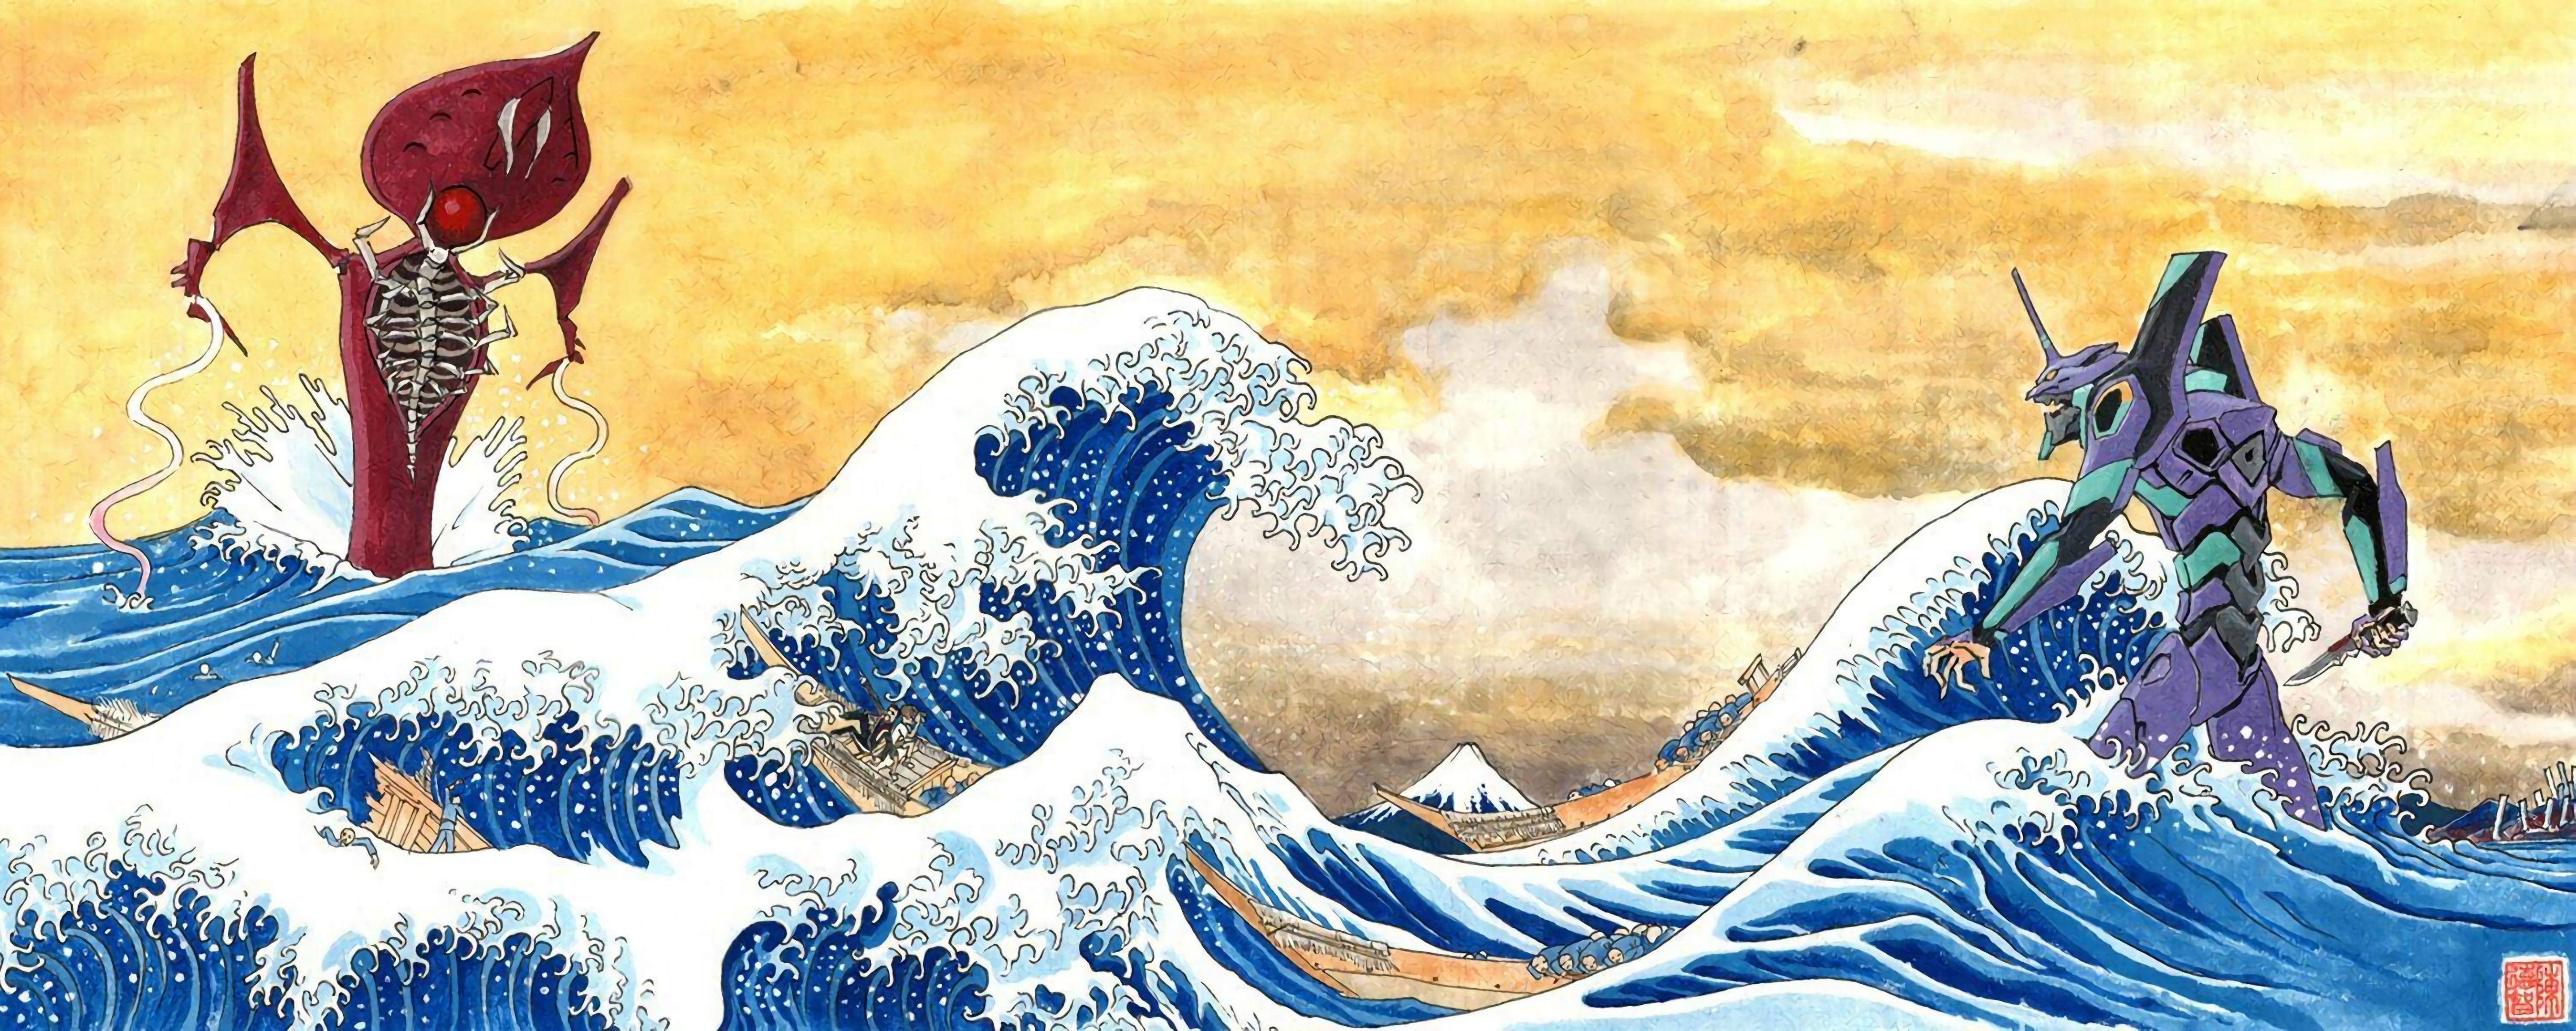 Hokusai  The Great Wave  Wall Mural 5445